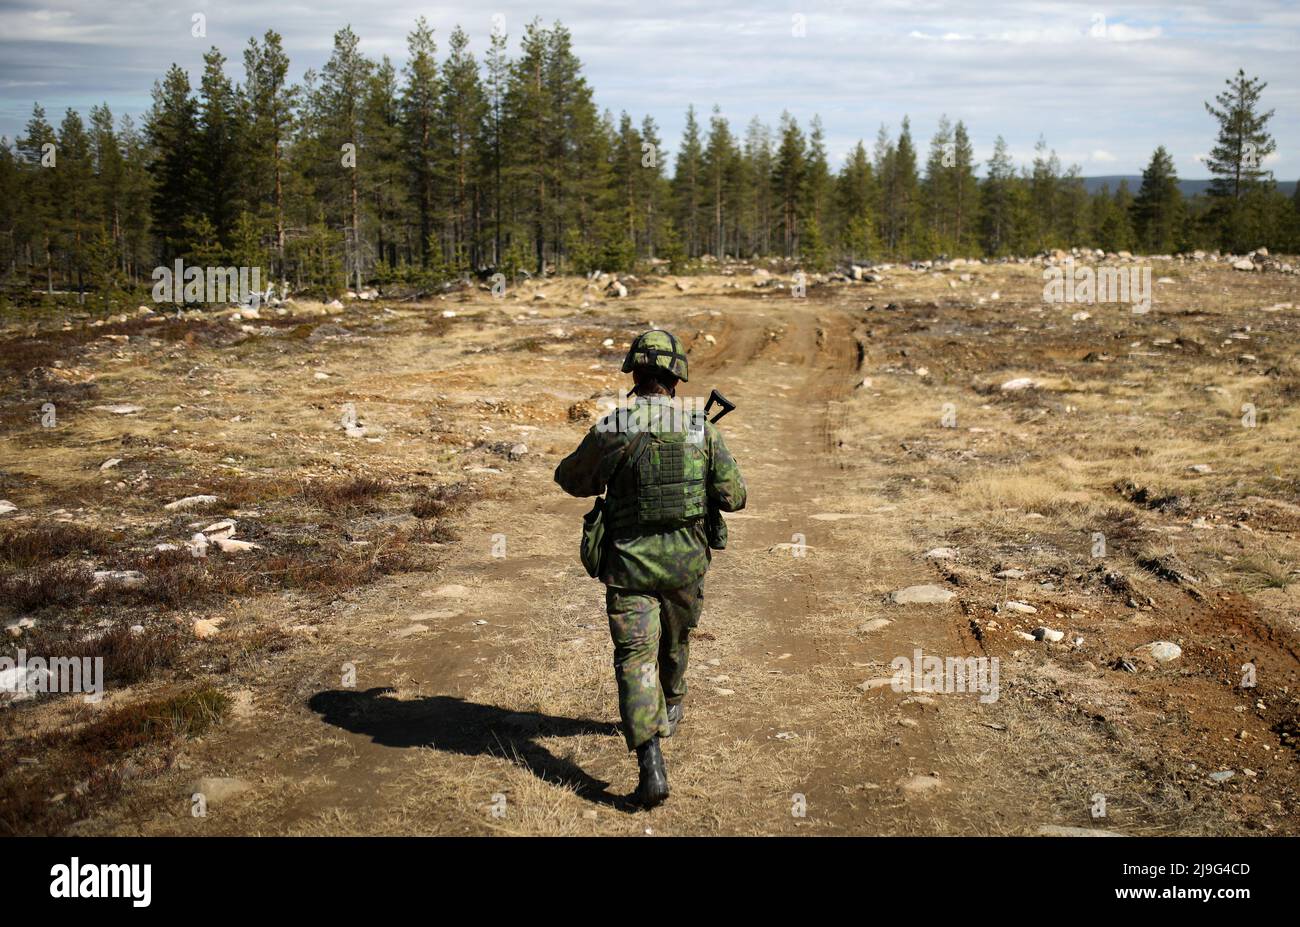 A Finnish soldier participates in Lightning Strike 22 exercise, in  Rovajarvi, Finland, May 23, 2022. REUTERS/Stoyan Nenov TPX IMAGES OF THE  DAY Stock Photo - Alamy